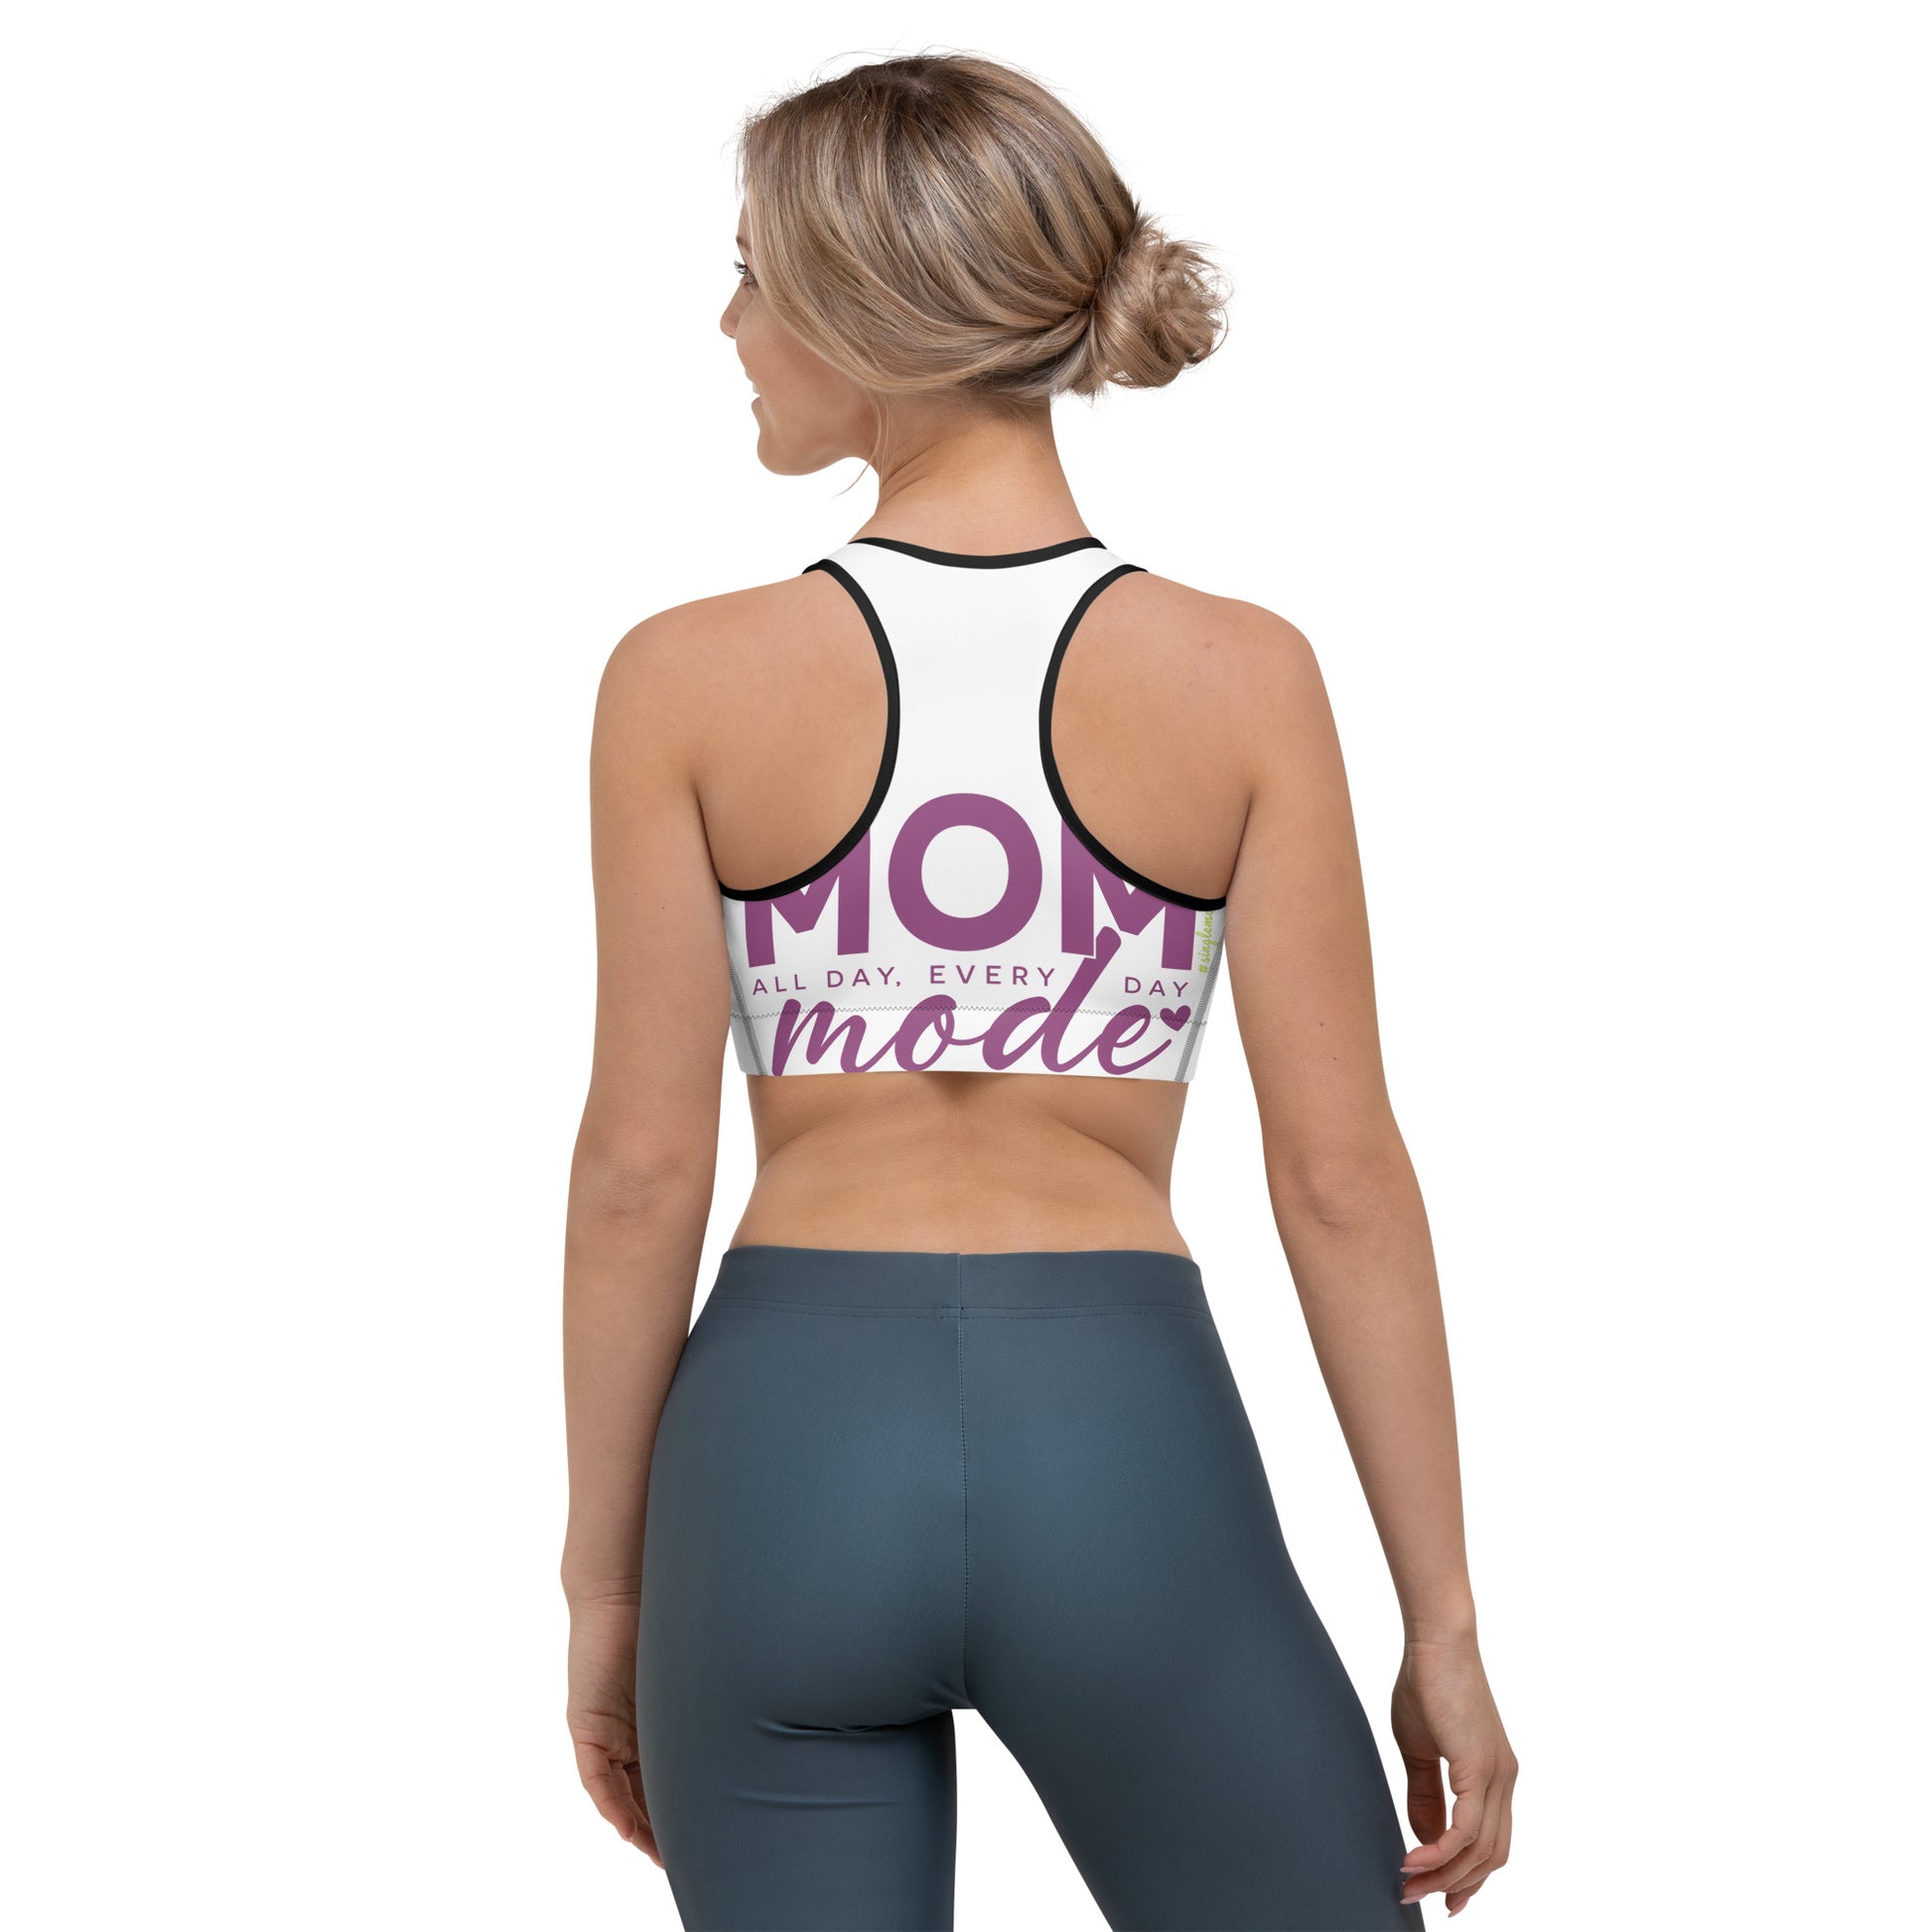 A mom with an idea invents new sports bra